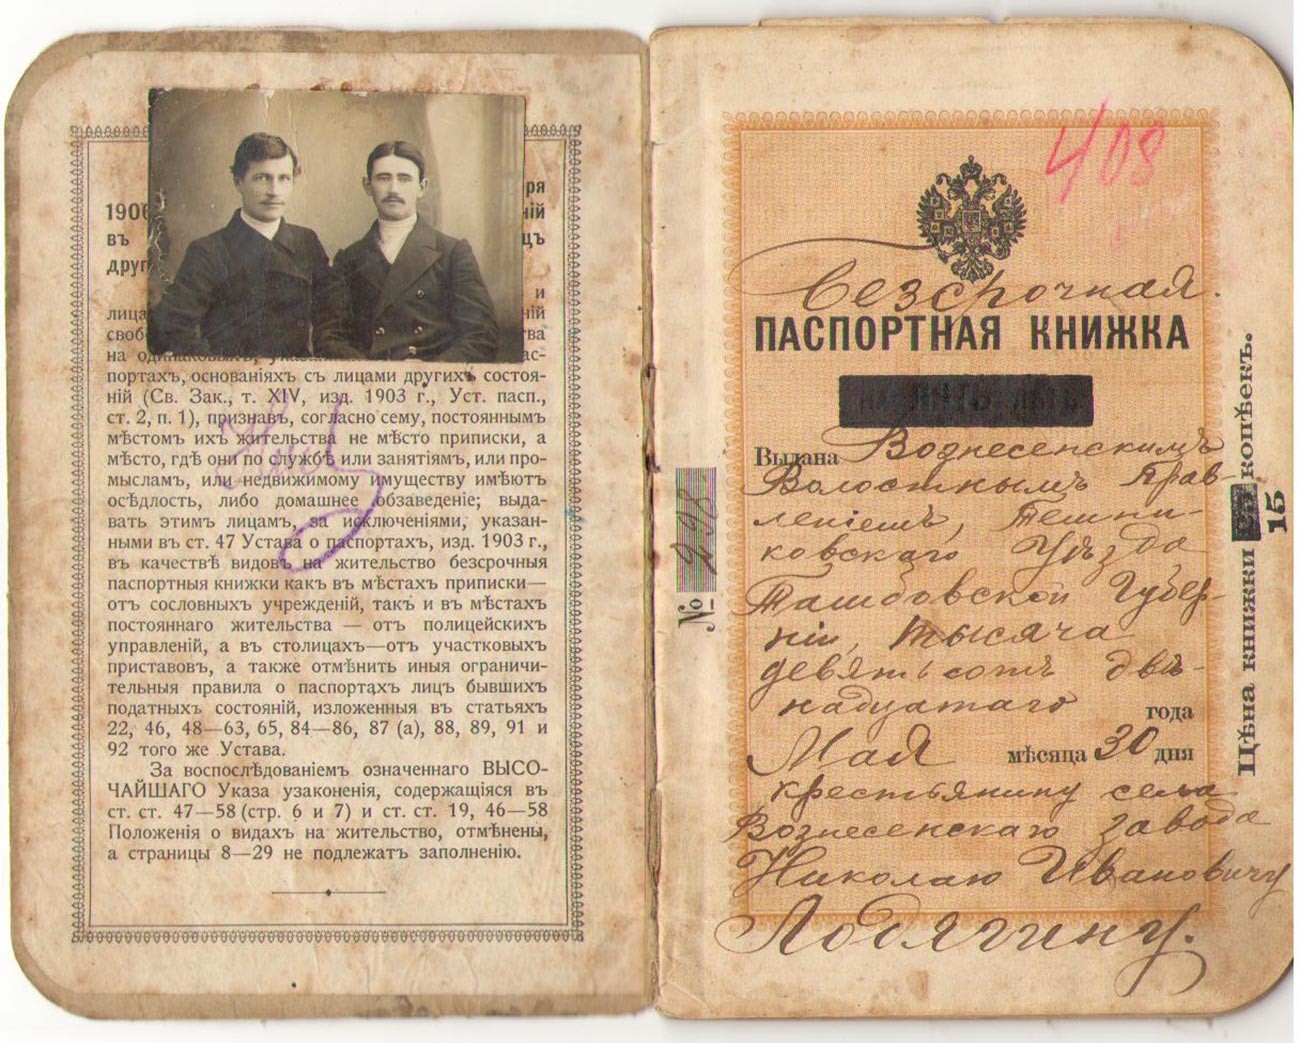 A passport of the Russian Empire